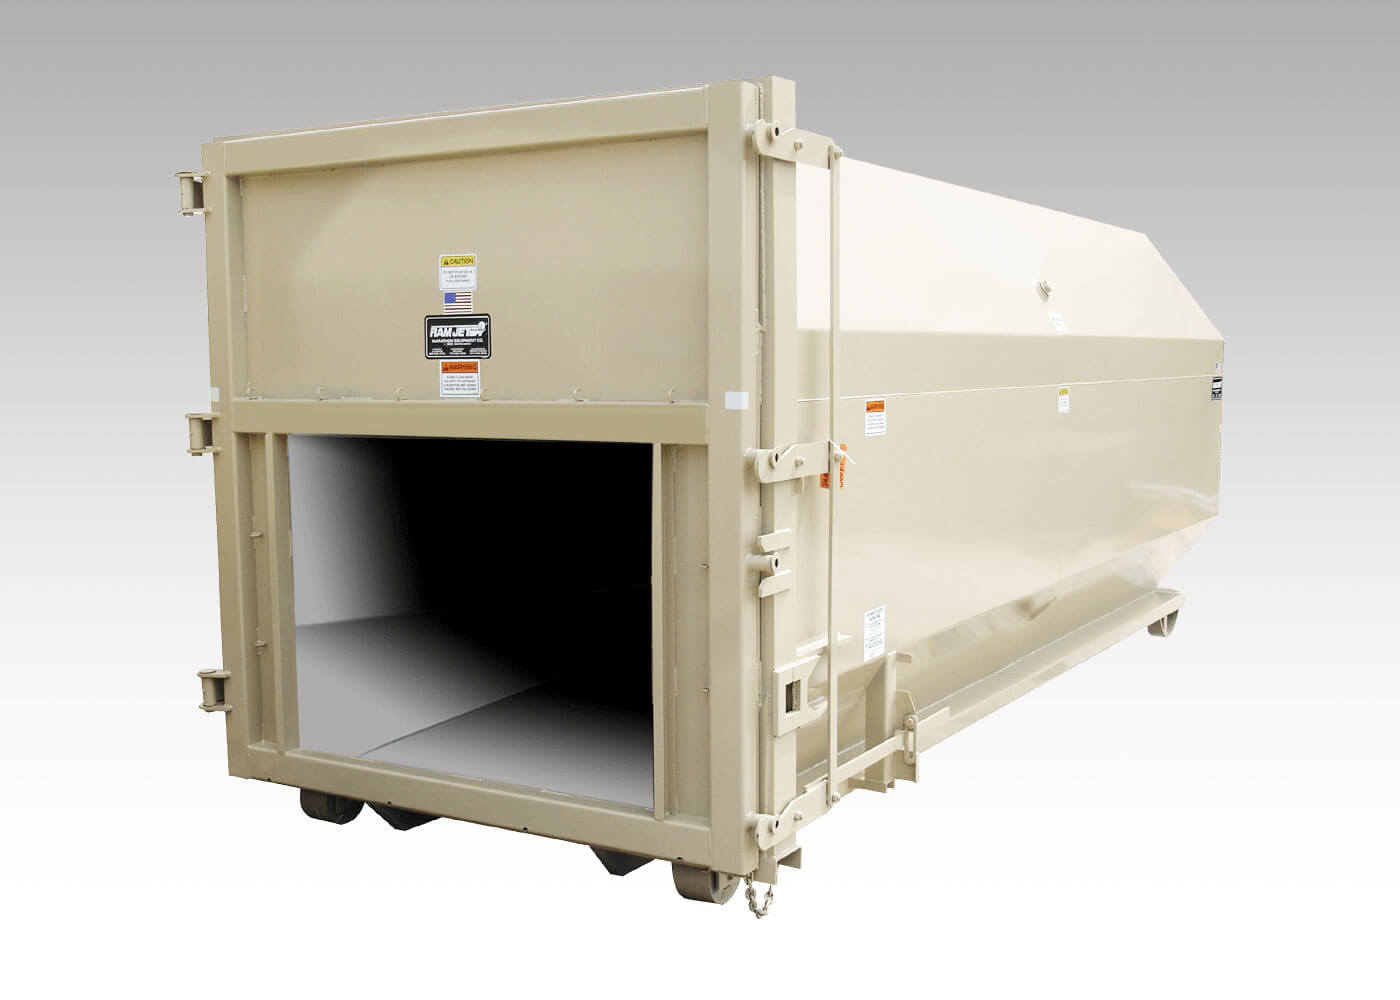 Octagon shaped trash compactor containers for rolloff trucks